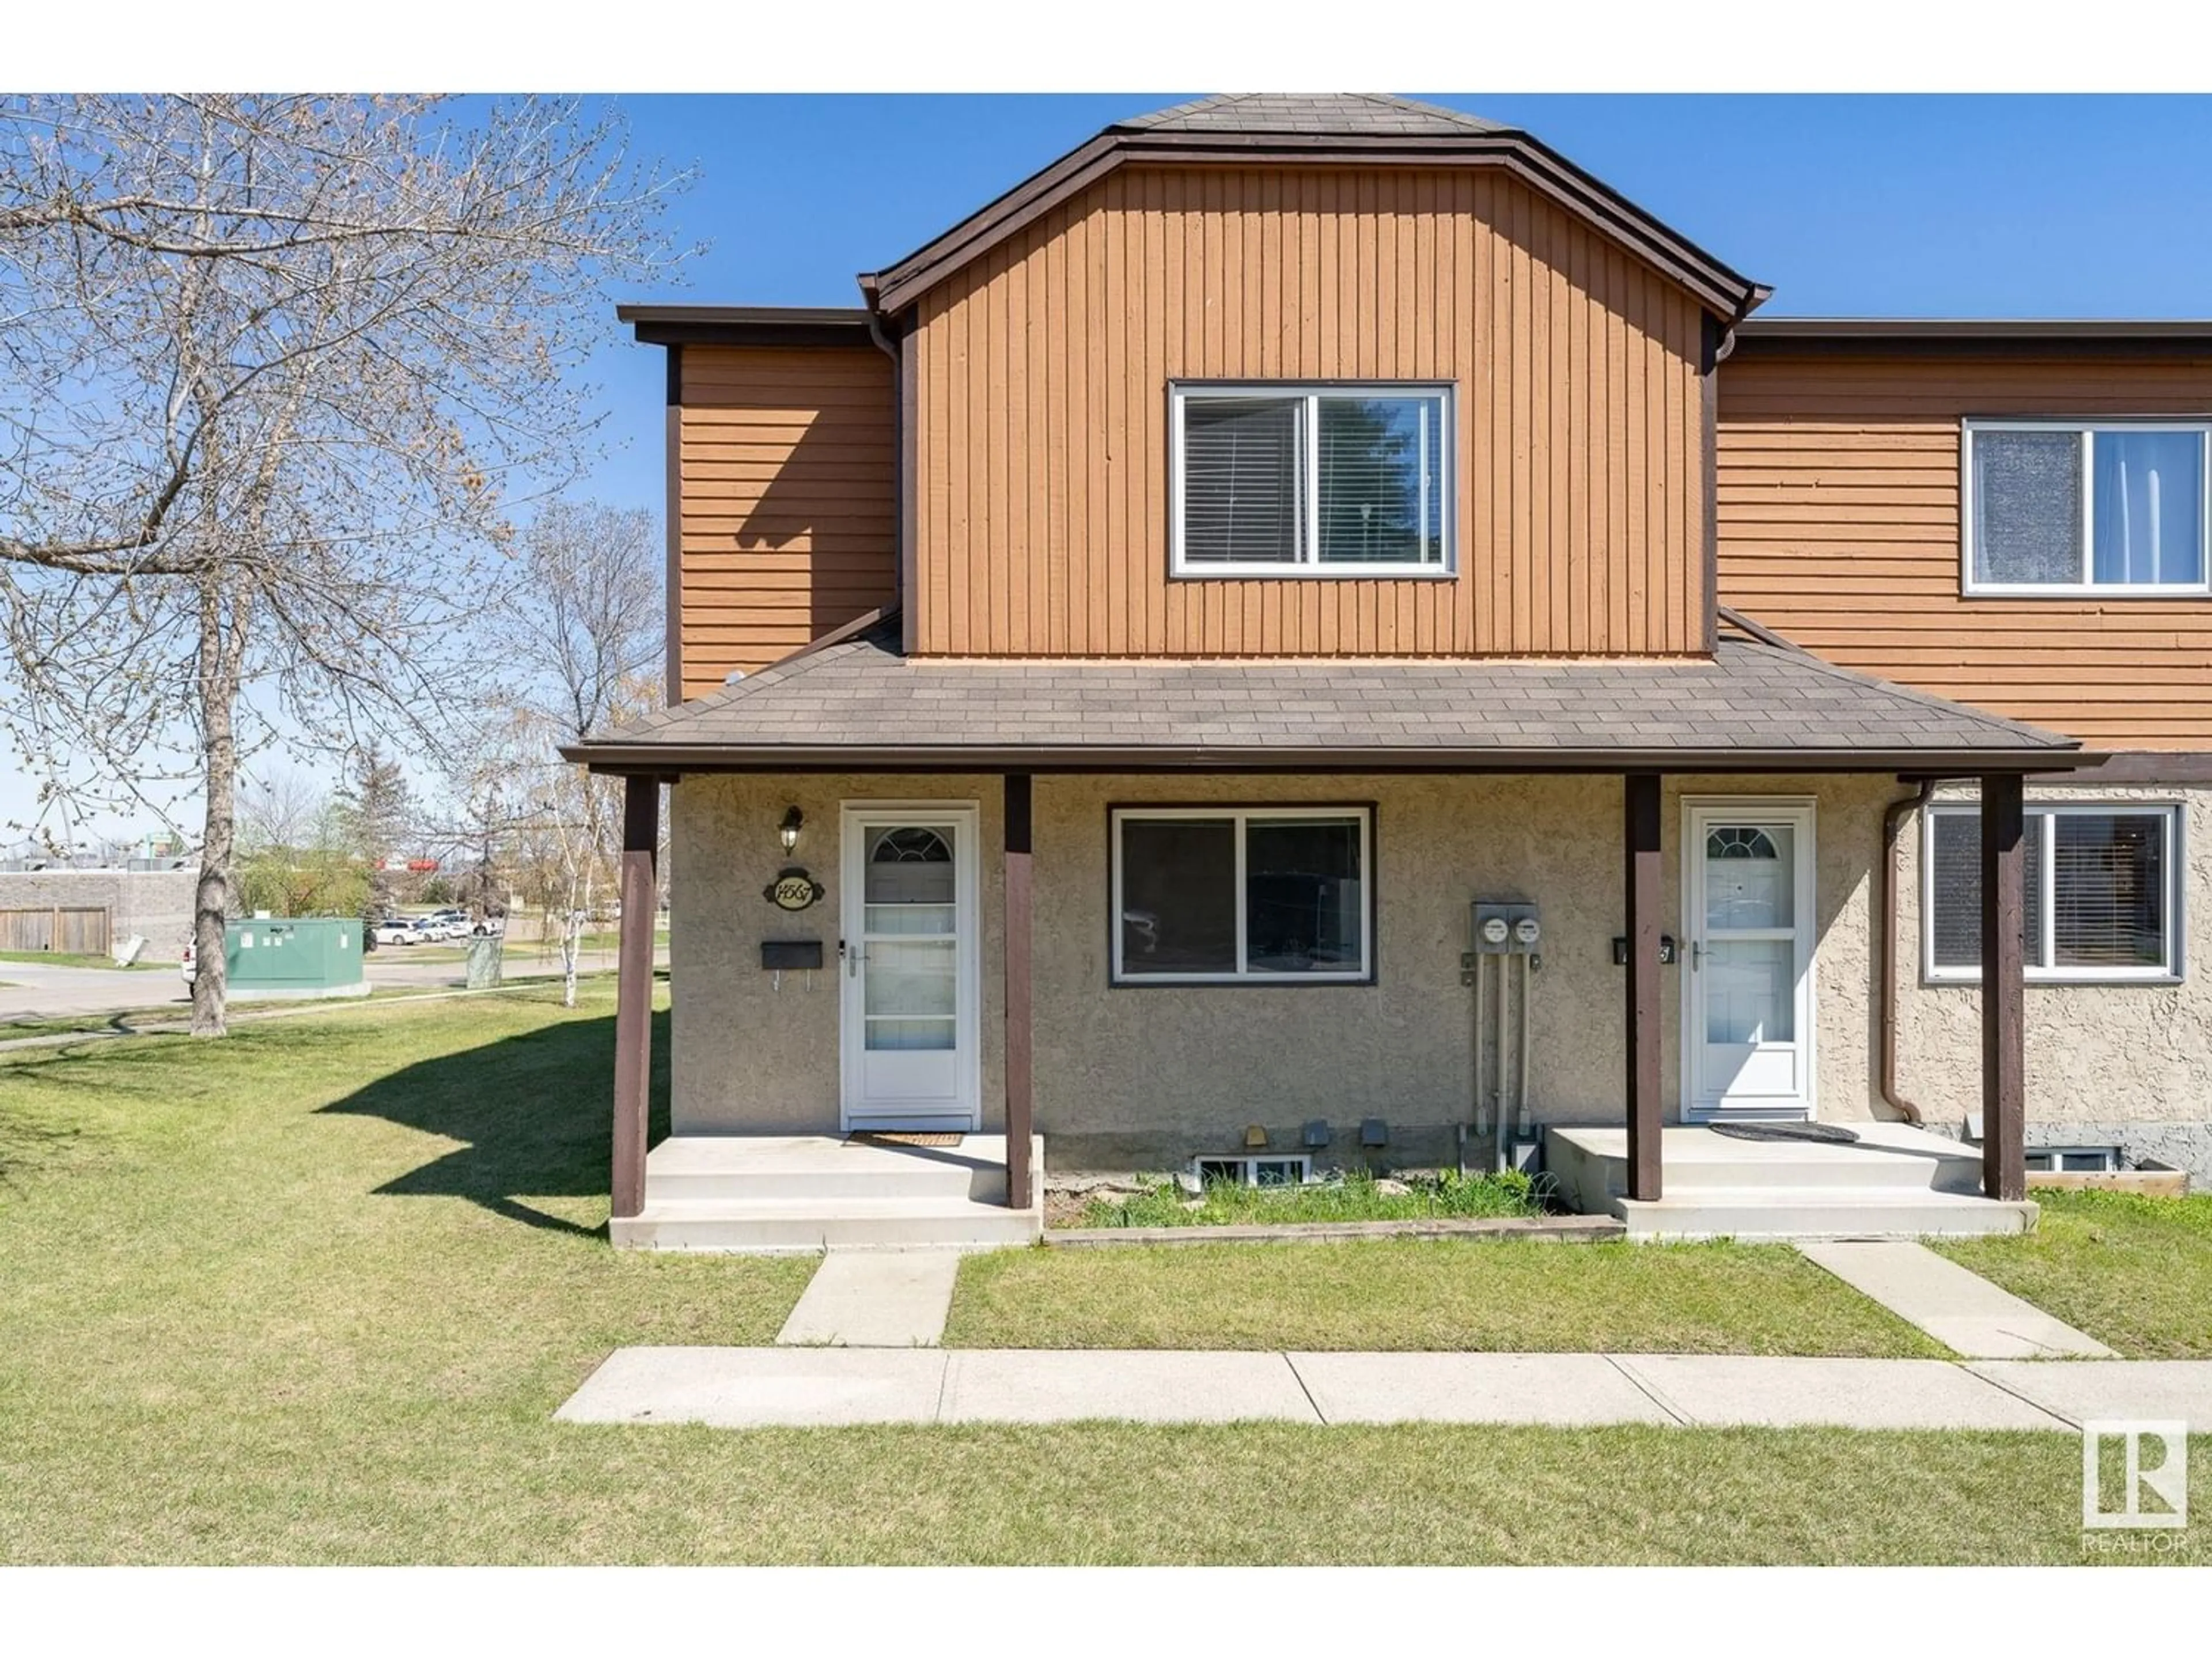 A pic from exterior of the house or condo for 14567 52 ST NW NW, Edmonton Alberta T5A4N1